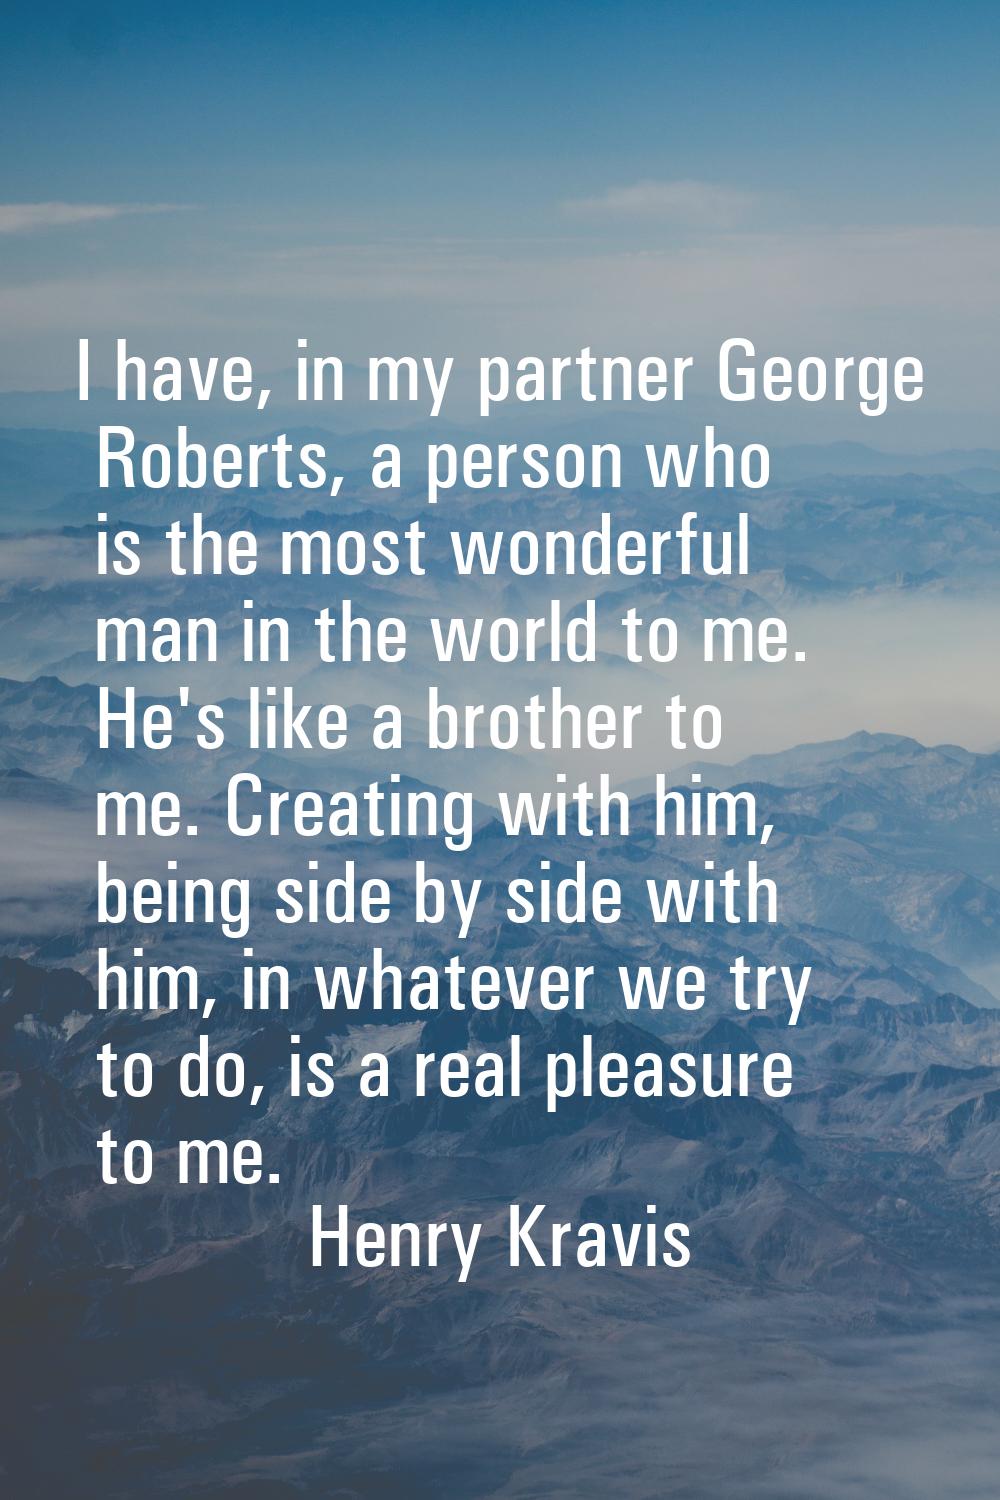 I have, in my partner George Roberts, a person who is the most wonderful man in the world to me. He